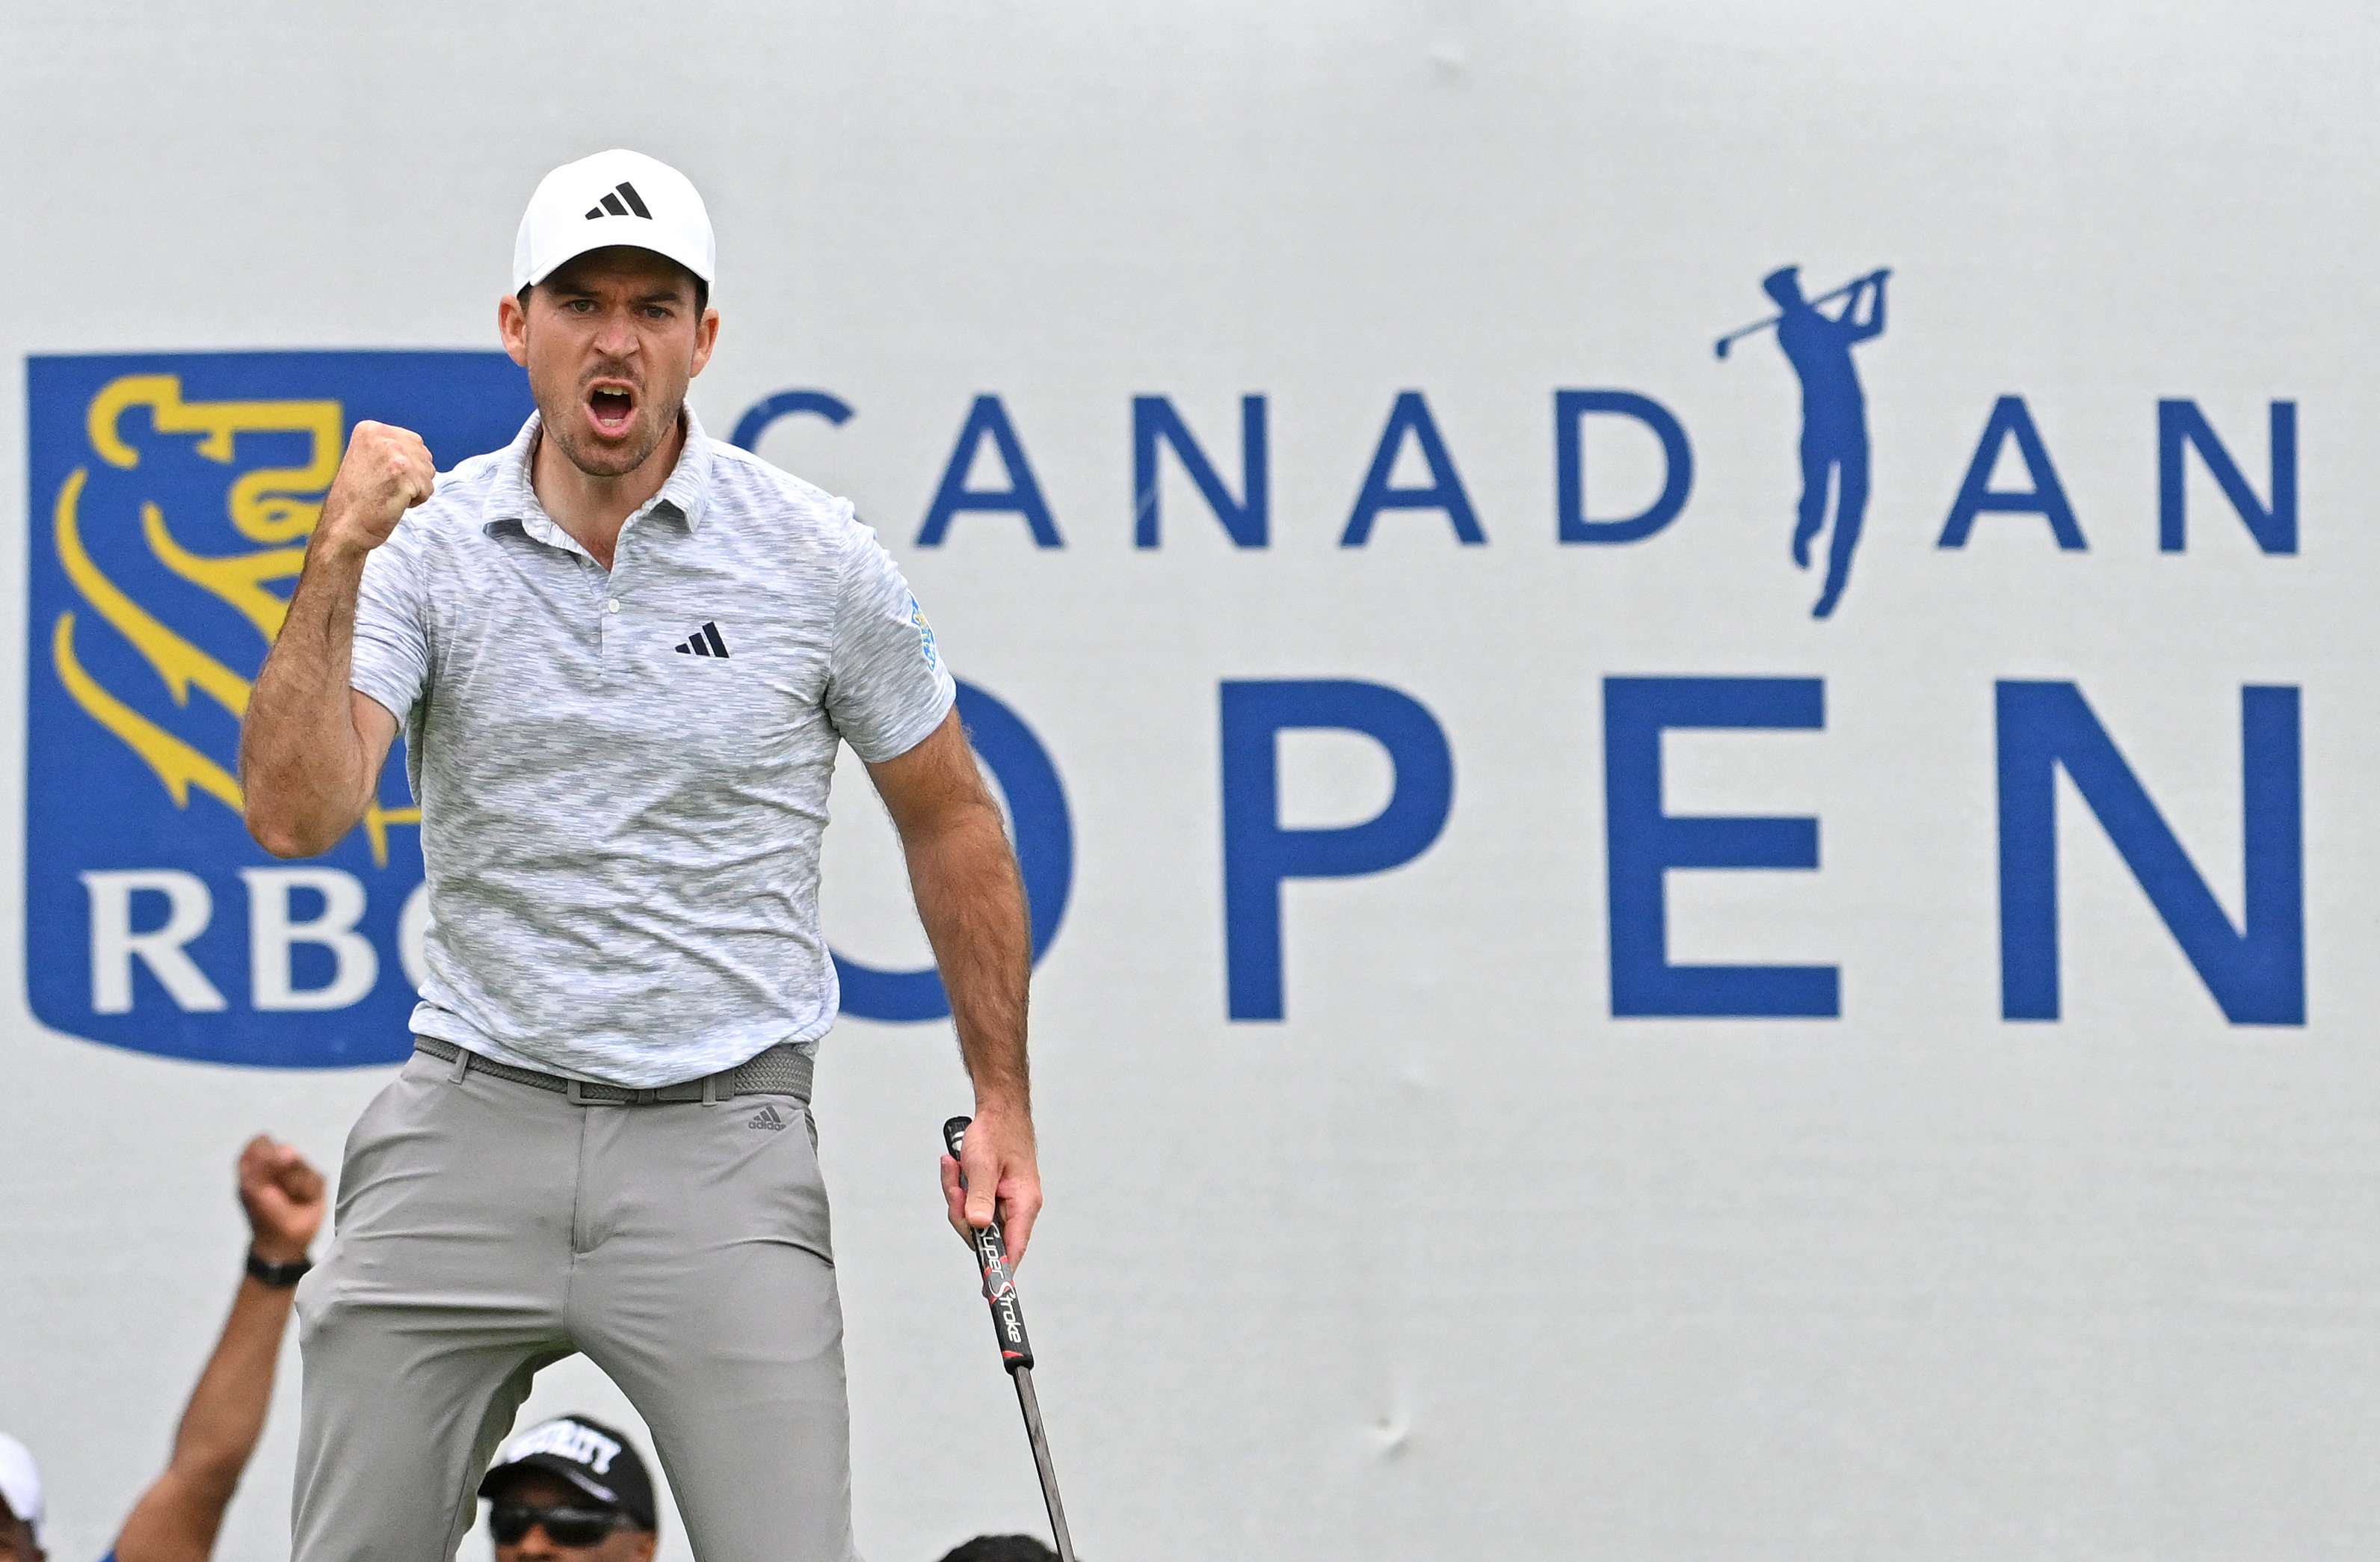 How To Bet - Ontario Sports Bettors Buy Local for RBC Canadian Open Golf Outrights 